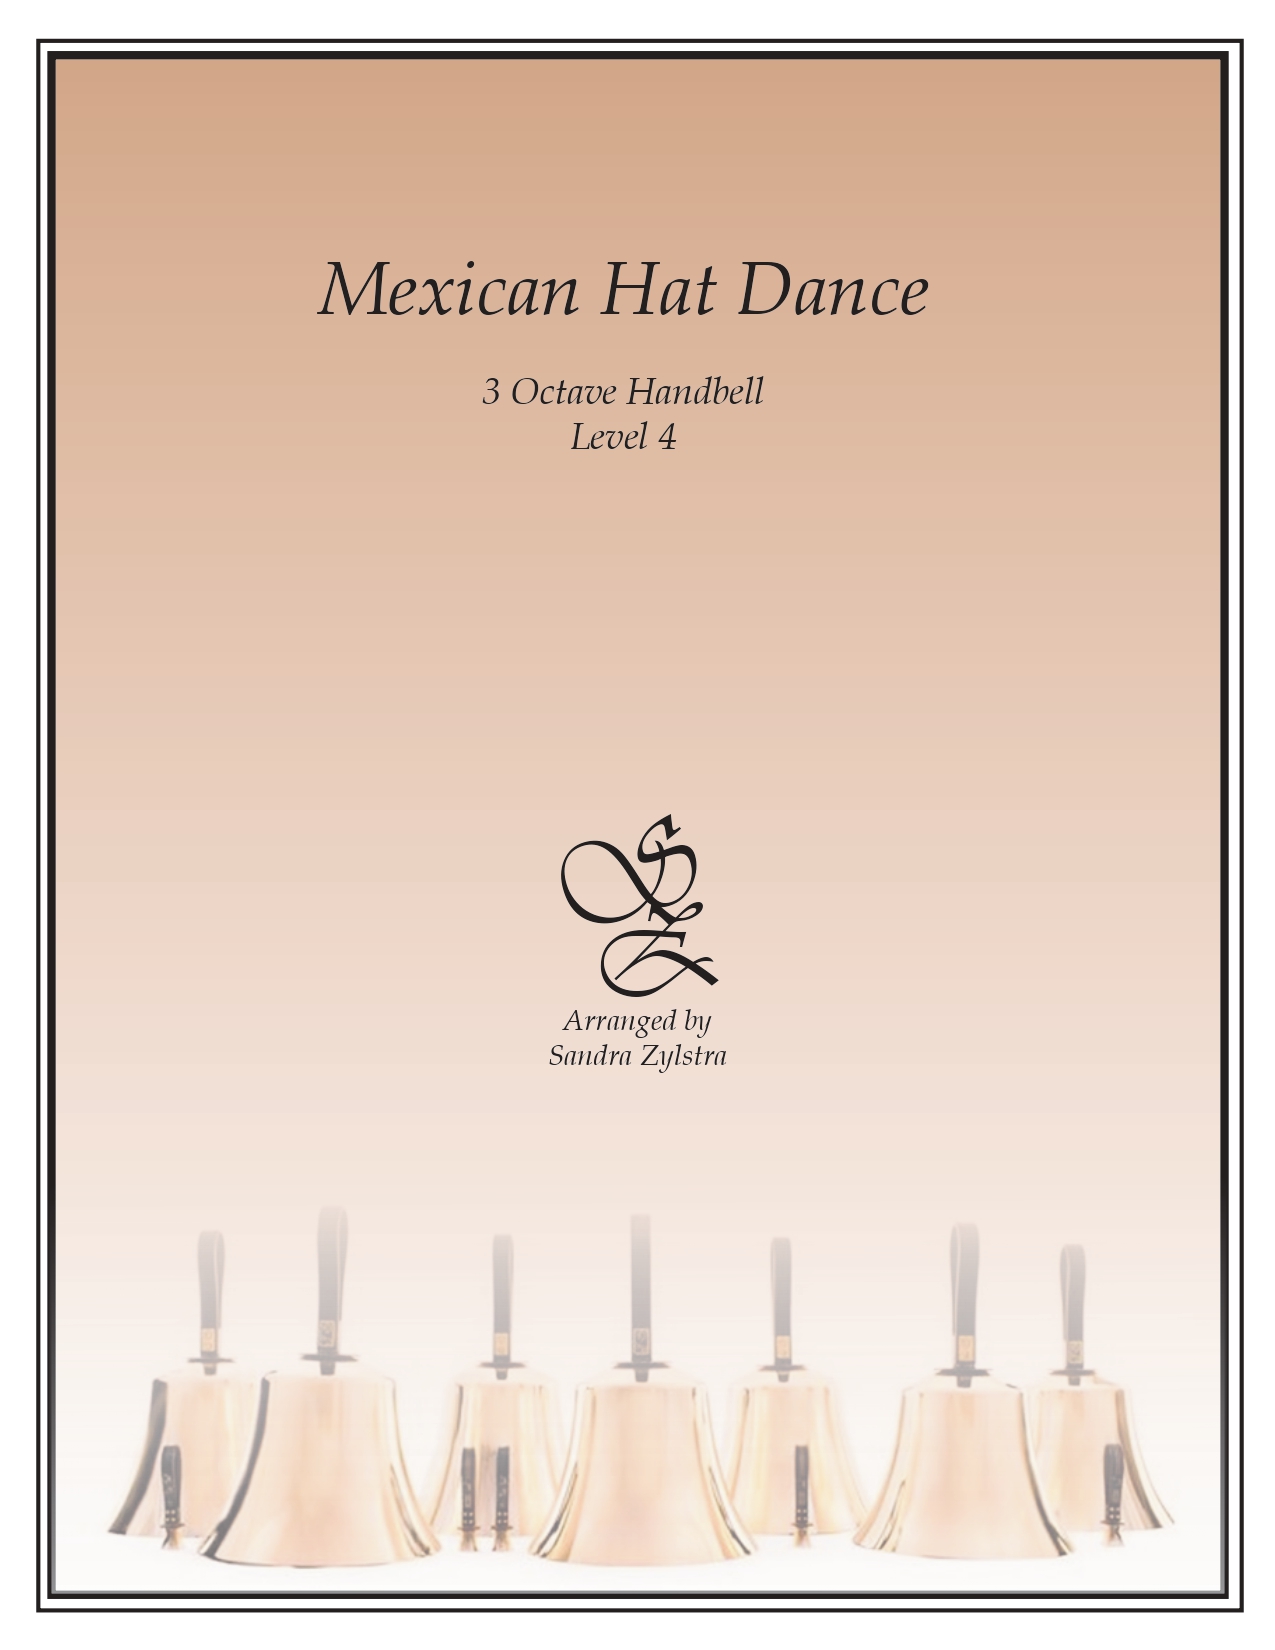 Mexican Hat Dance 3 octave handbells cover page 00011